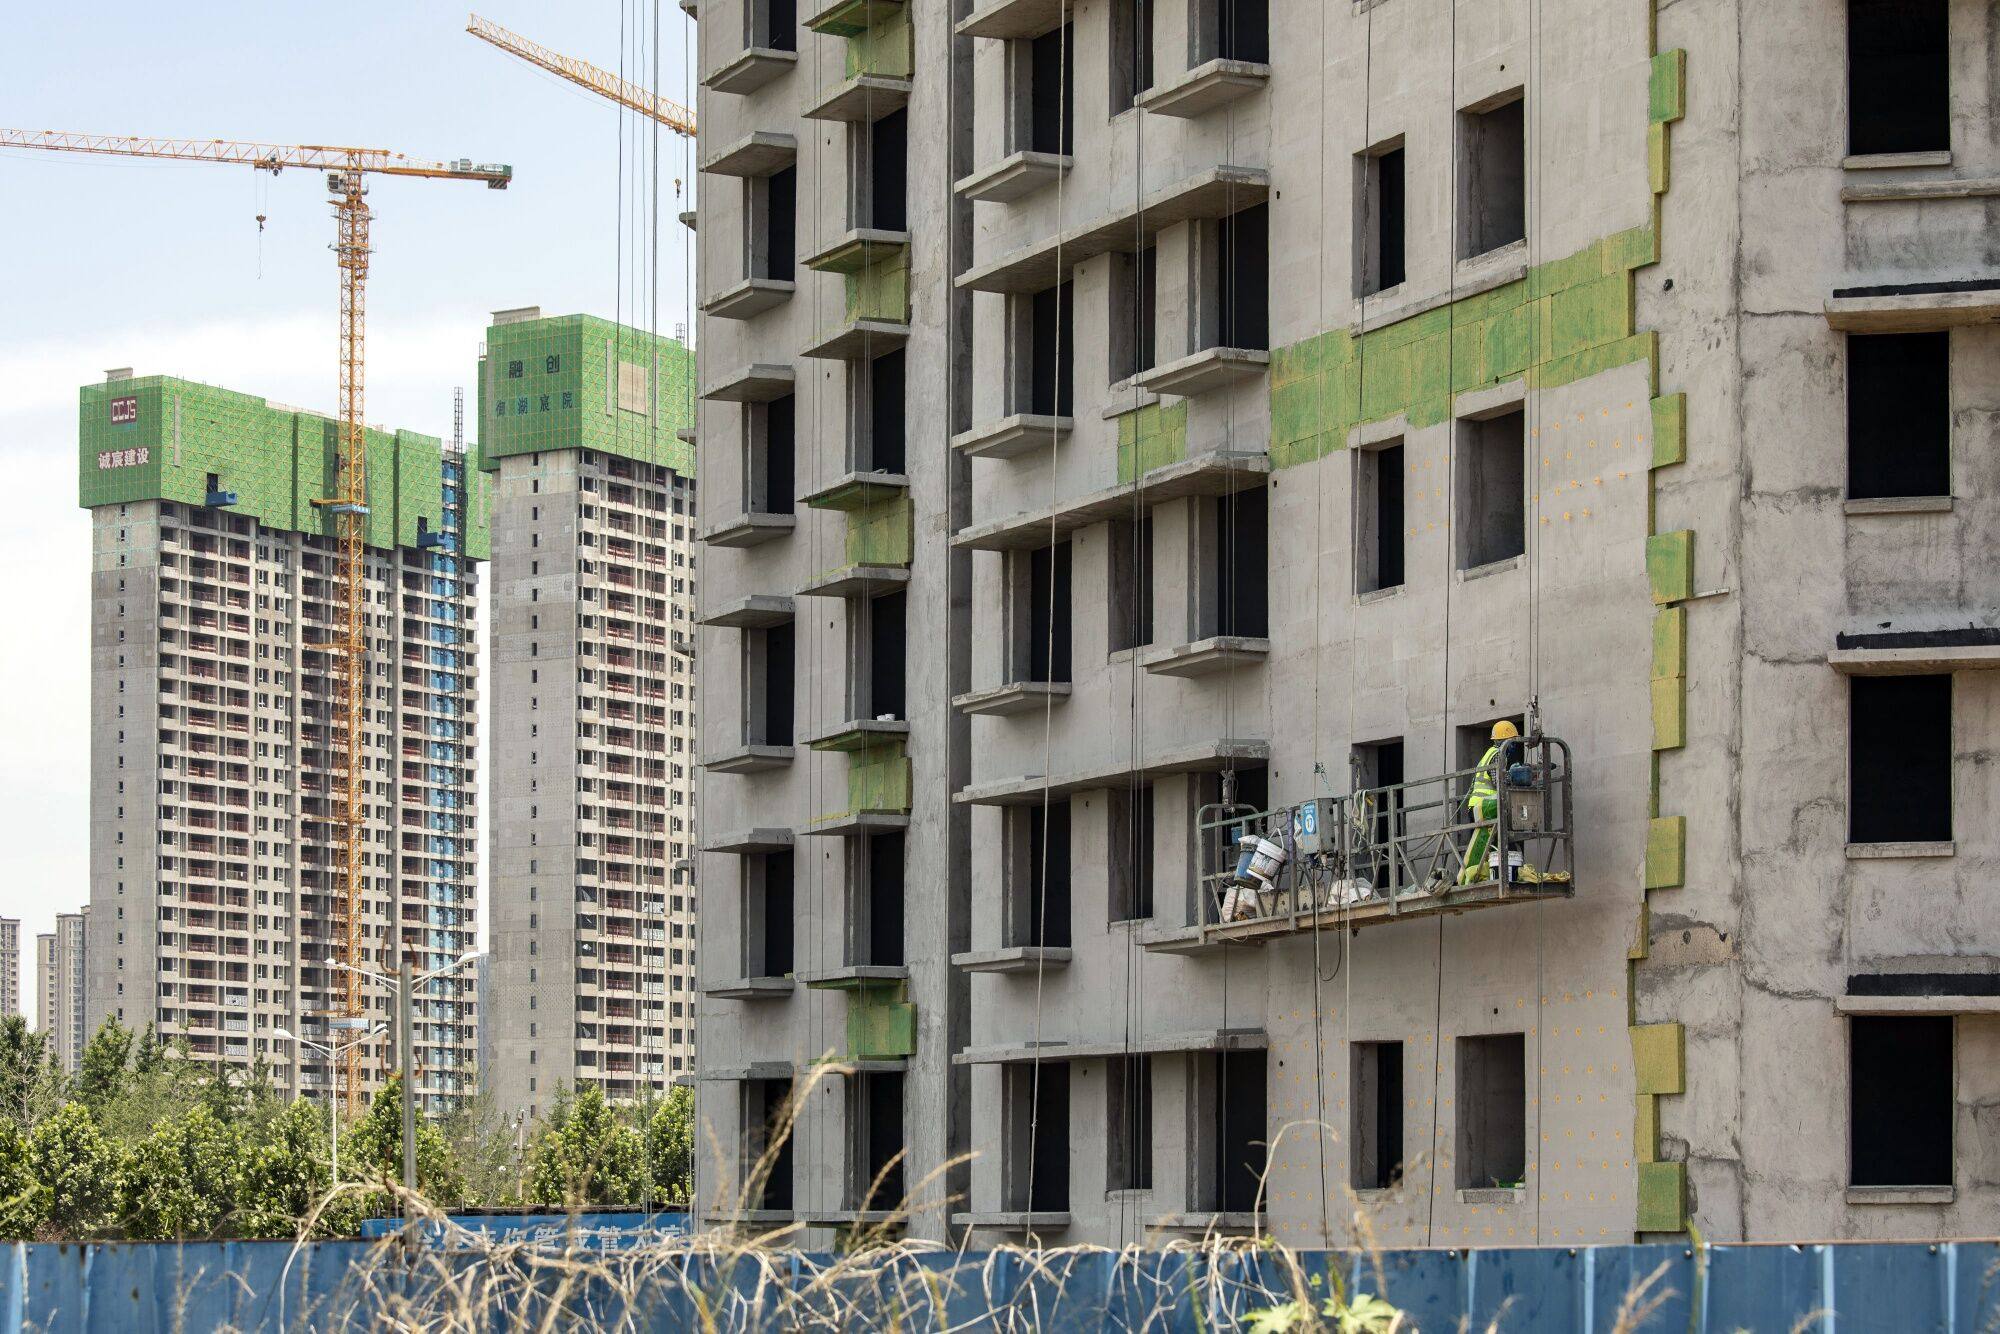 Residential buildings under construction in Zhengzhou, Henan province, China. China is working on a new basket of measures to support the property market. Photo: Bloomberg